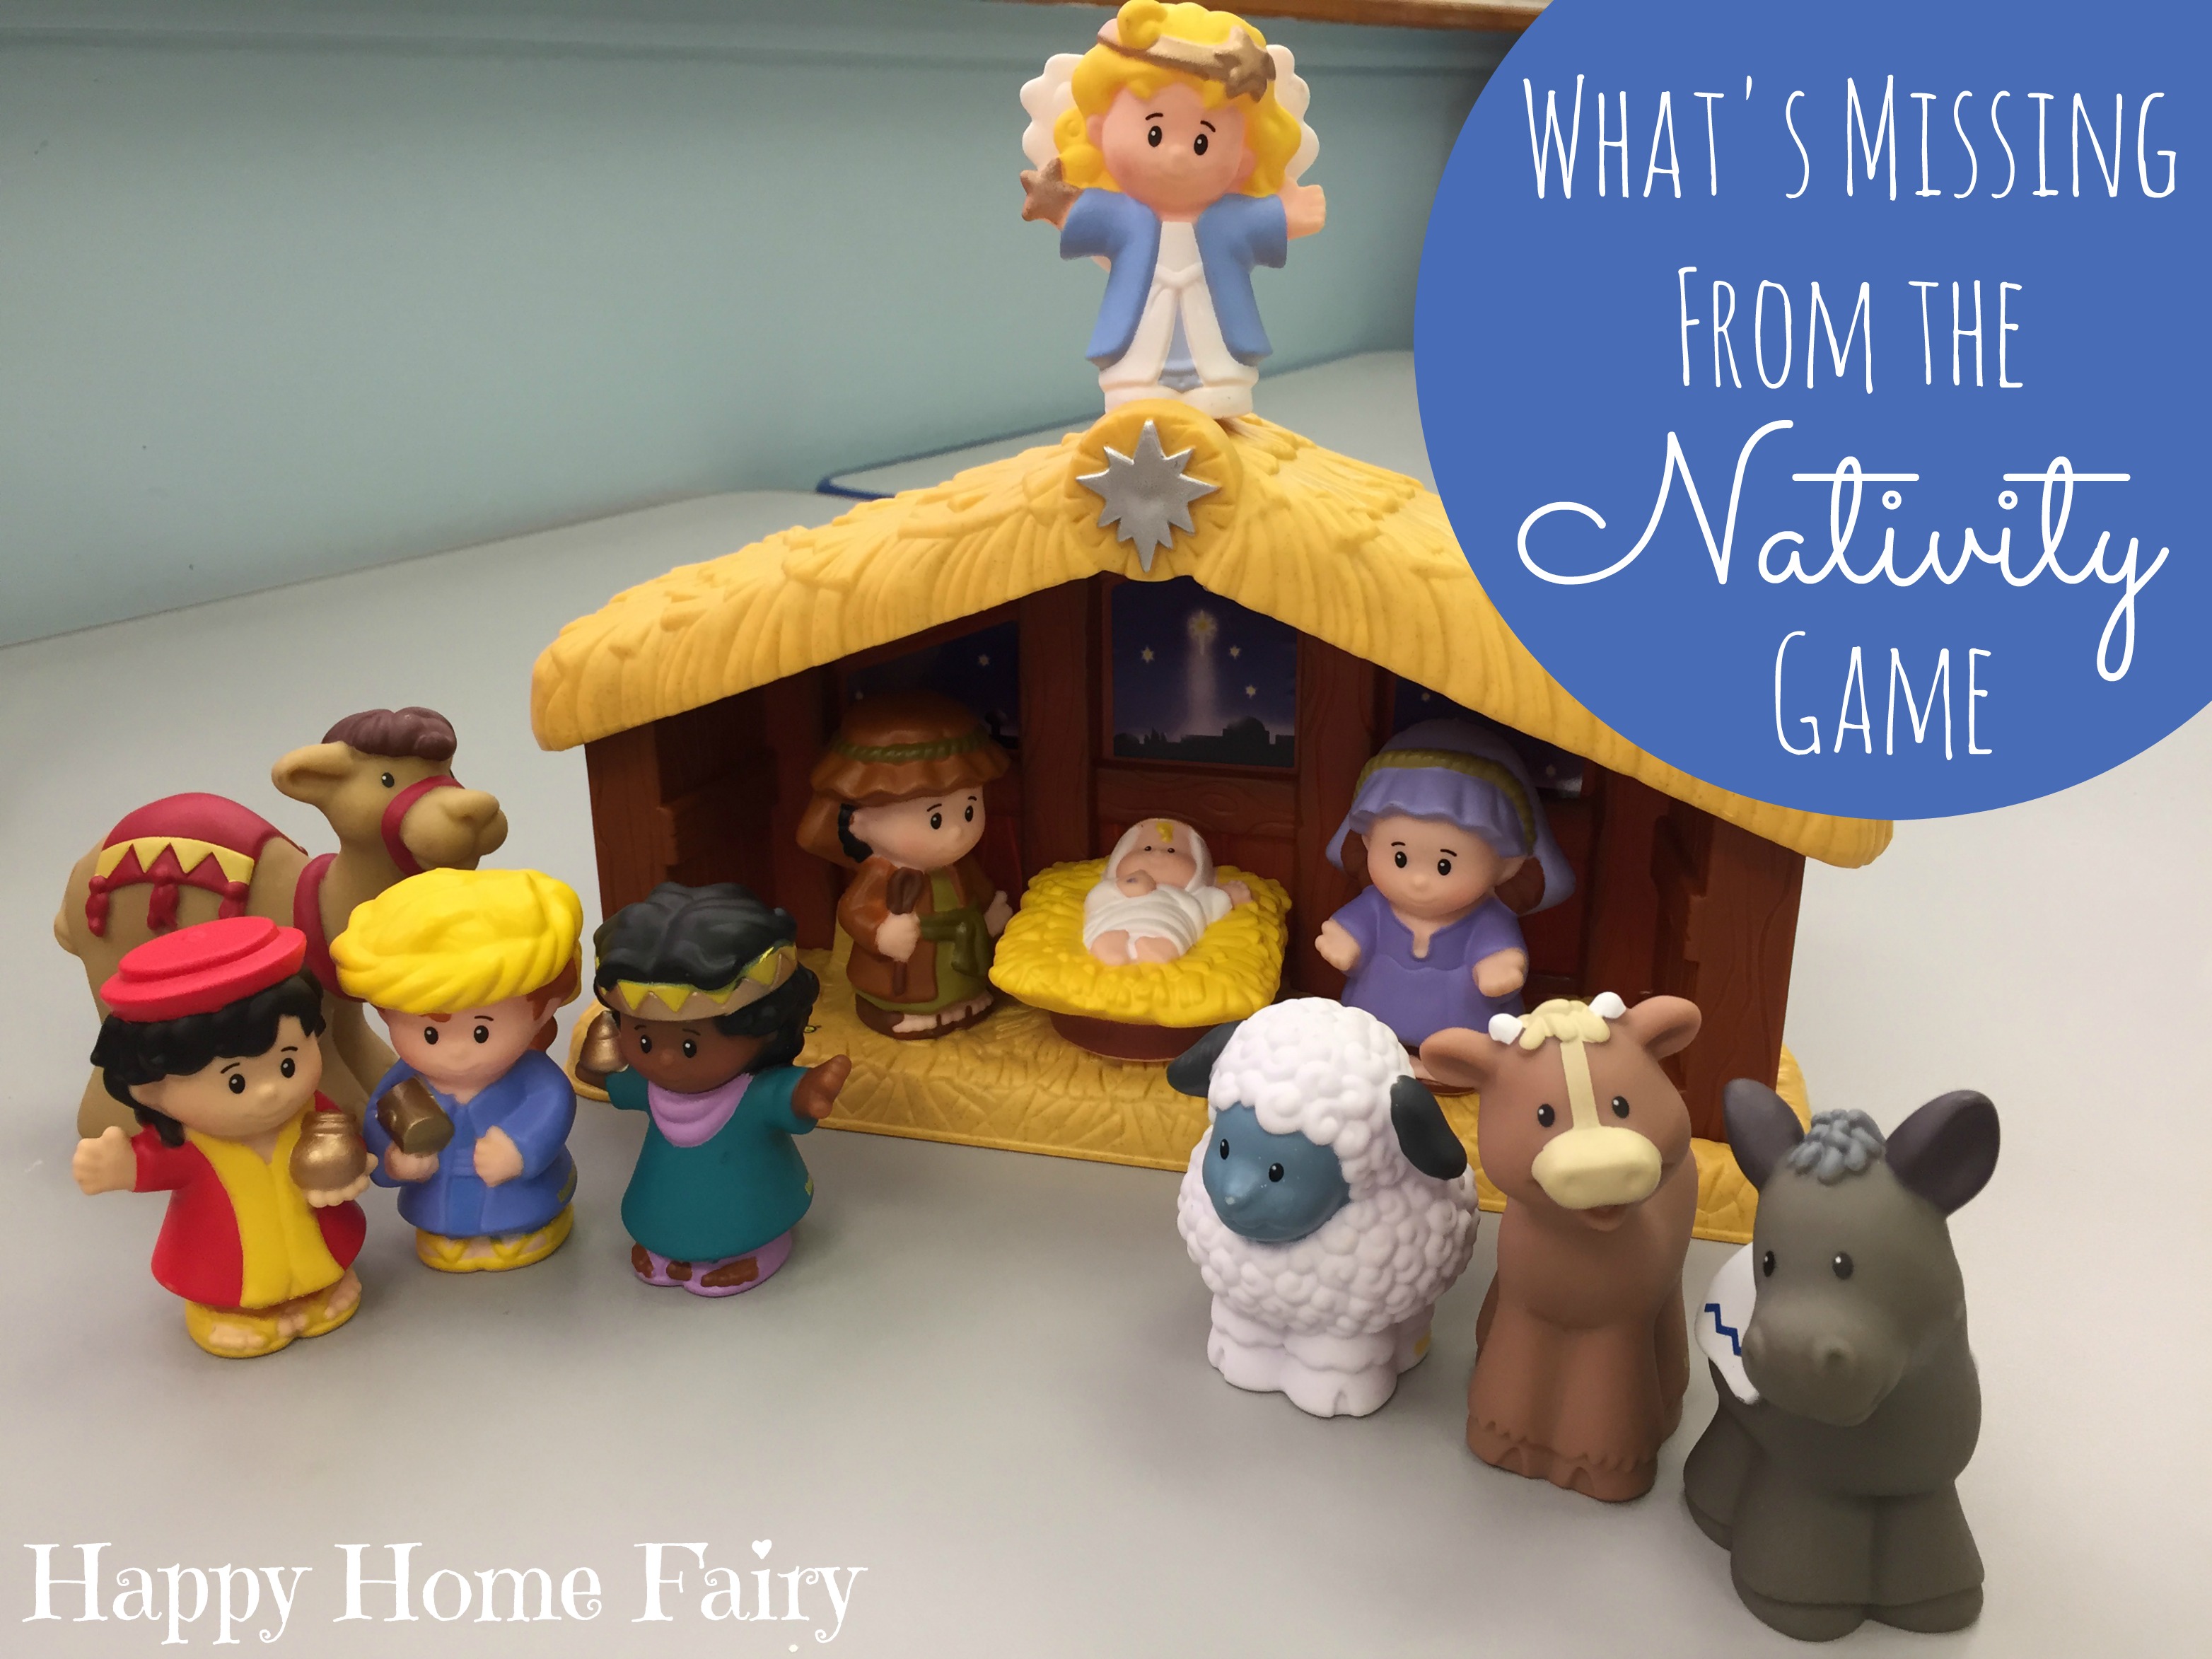 What's Missing From the Nativity? Game - Happy Home Fairy3128 x 2346